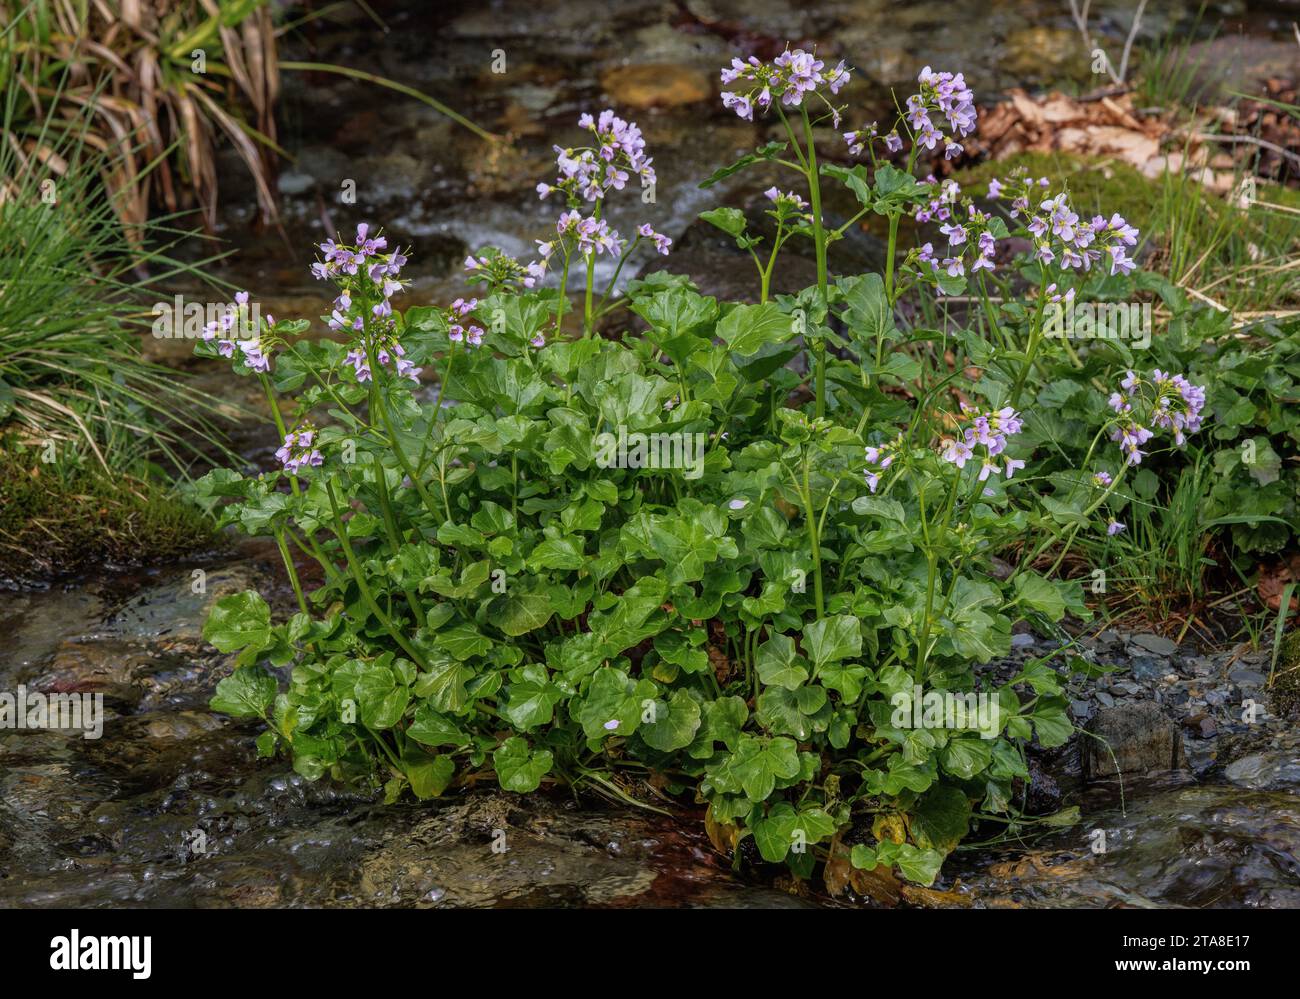 Broad leaved cuckoo flower, Cardamine raphanifolia, growing in a stream, in flower, in the Pyrenees. Stock Photo